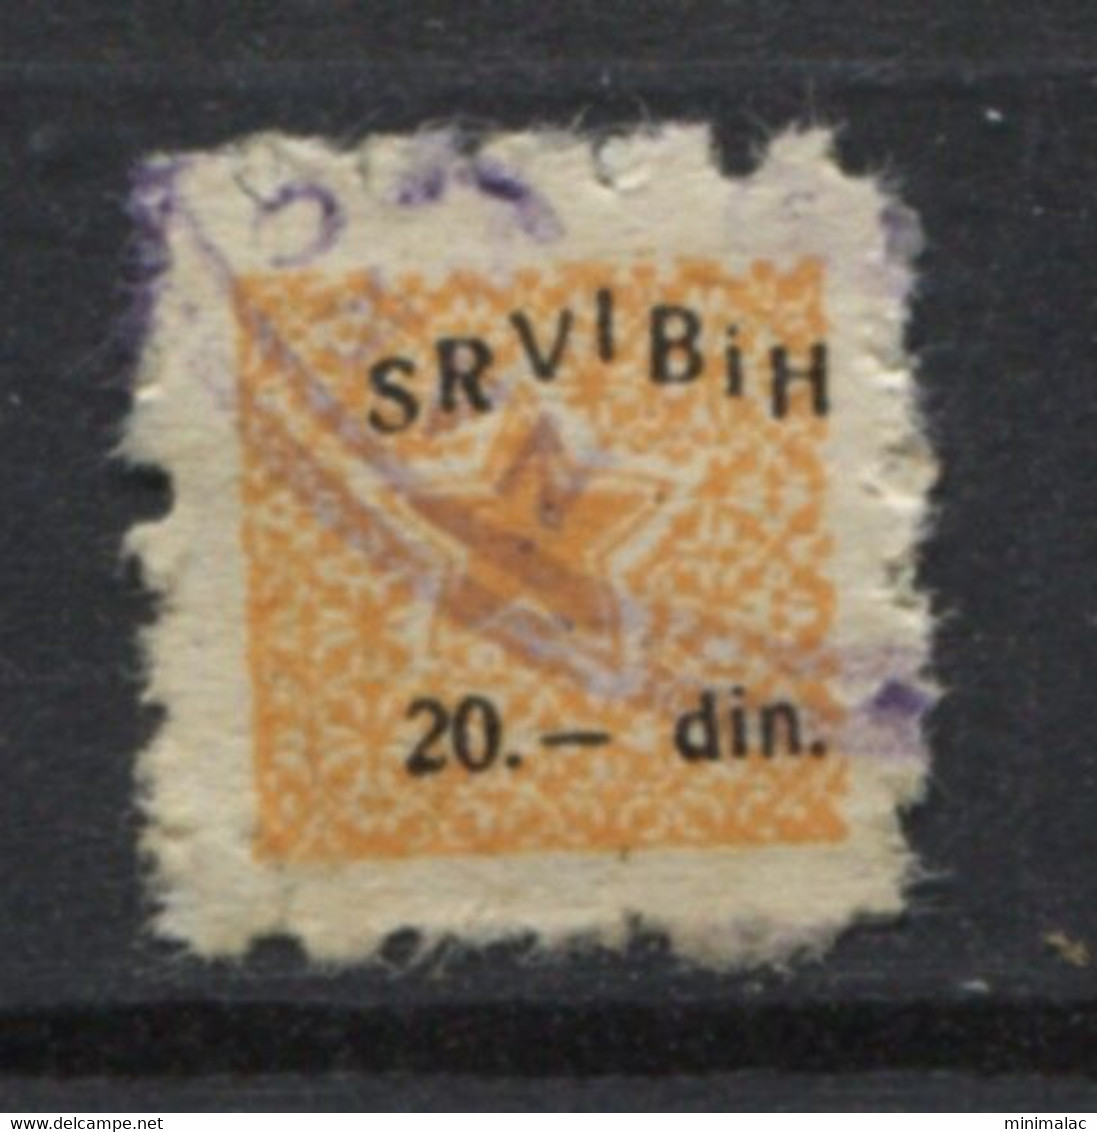 Yugoslavia 1958, Stamp For Membership, SRVIBiH, Labor Union, Administrative Stamp - Revenue, Tax Stamp, 20d    Used - Officials